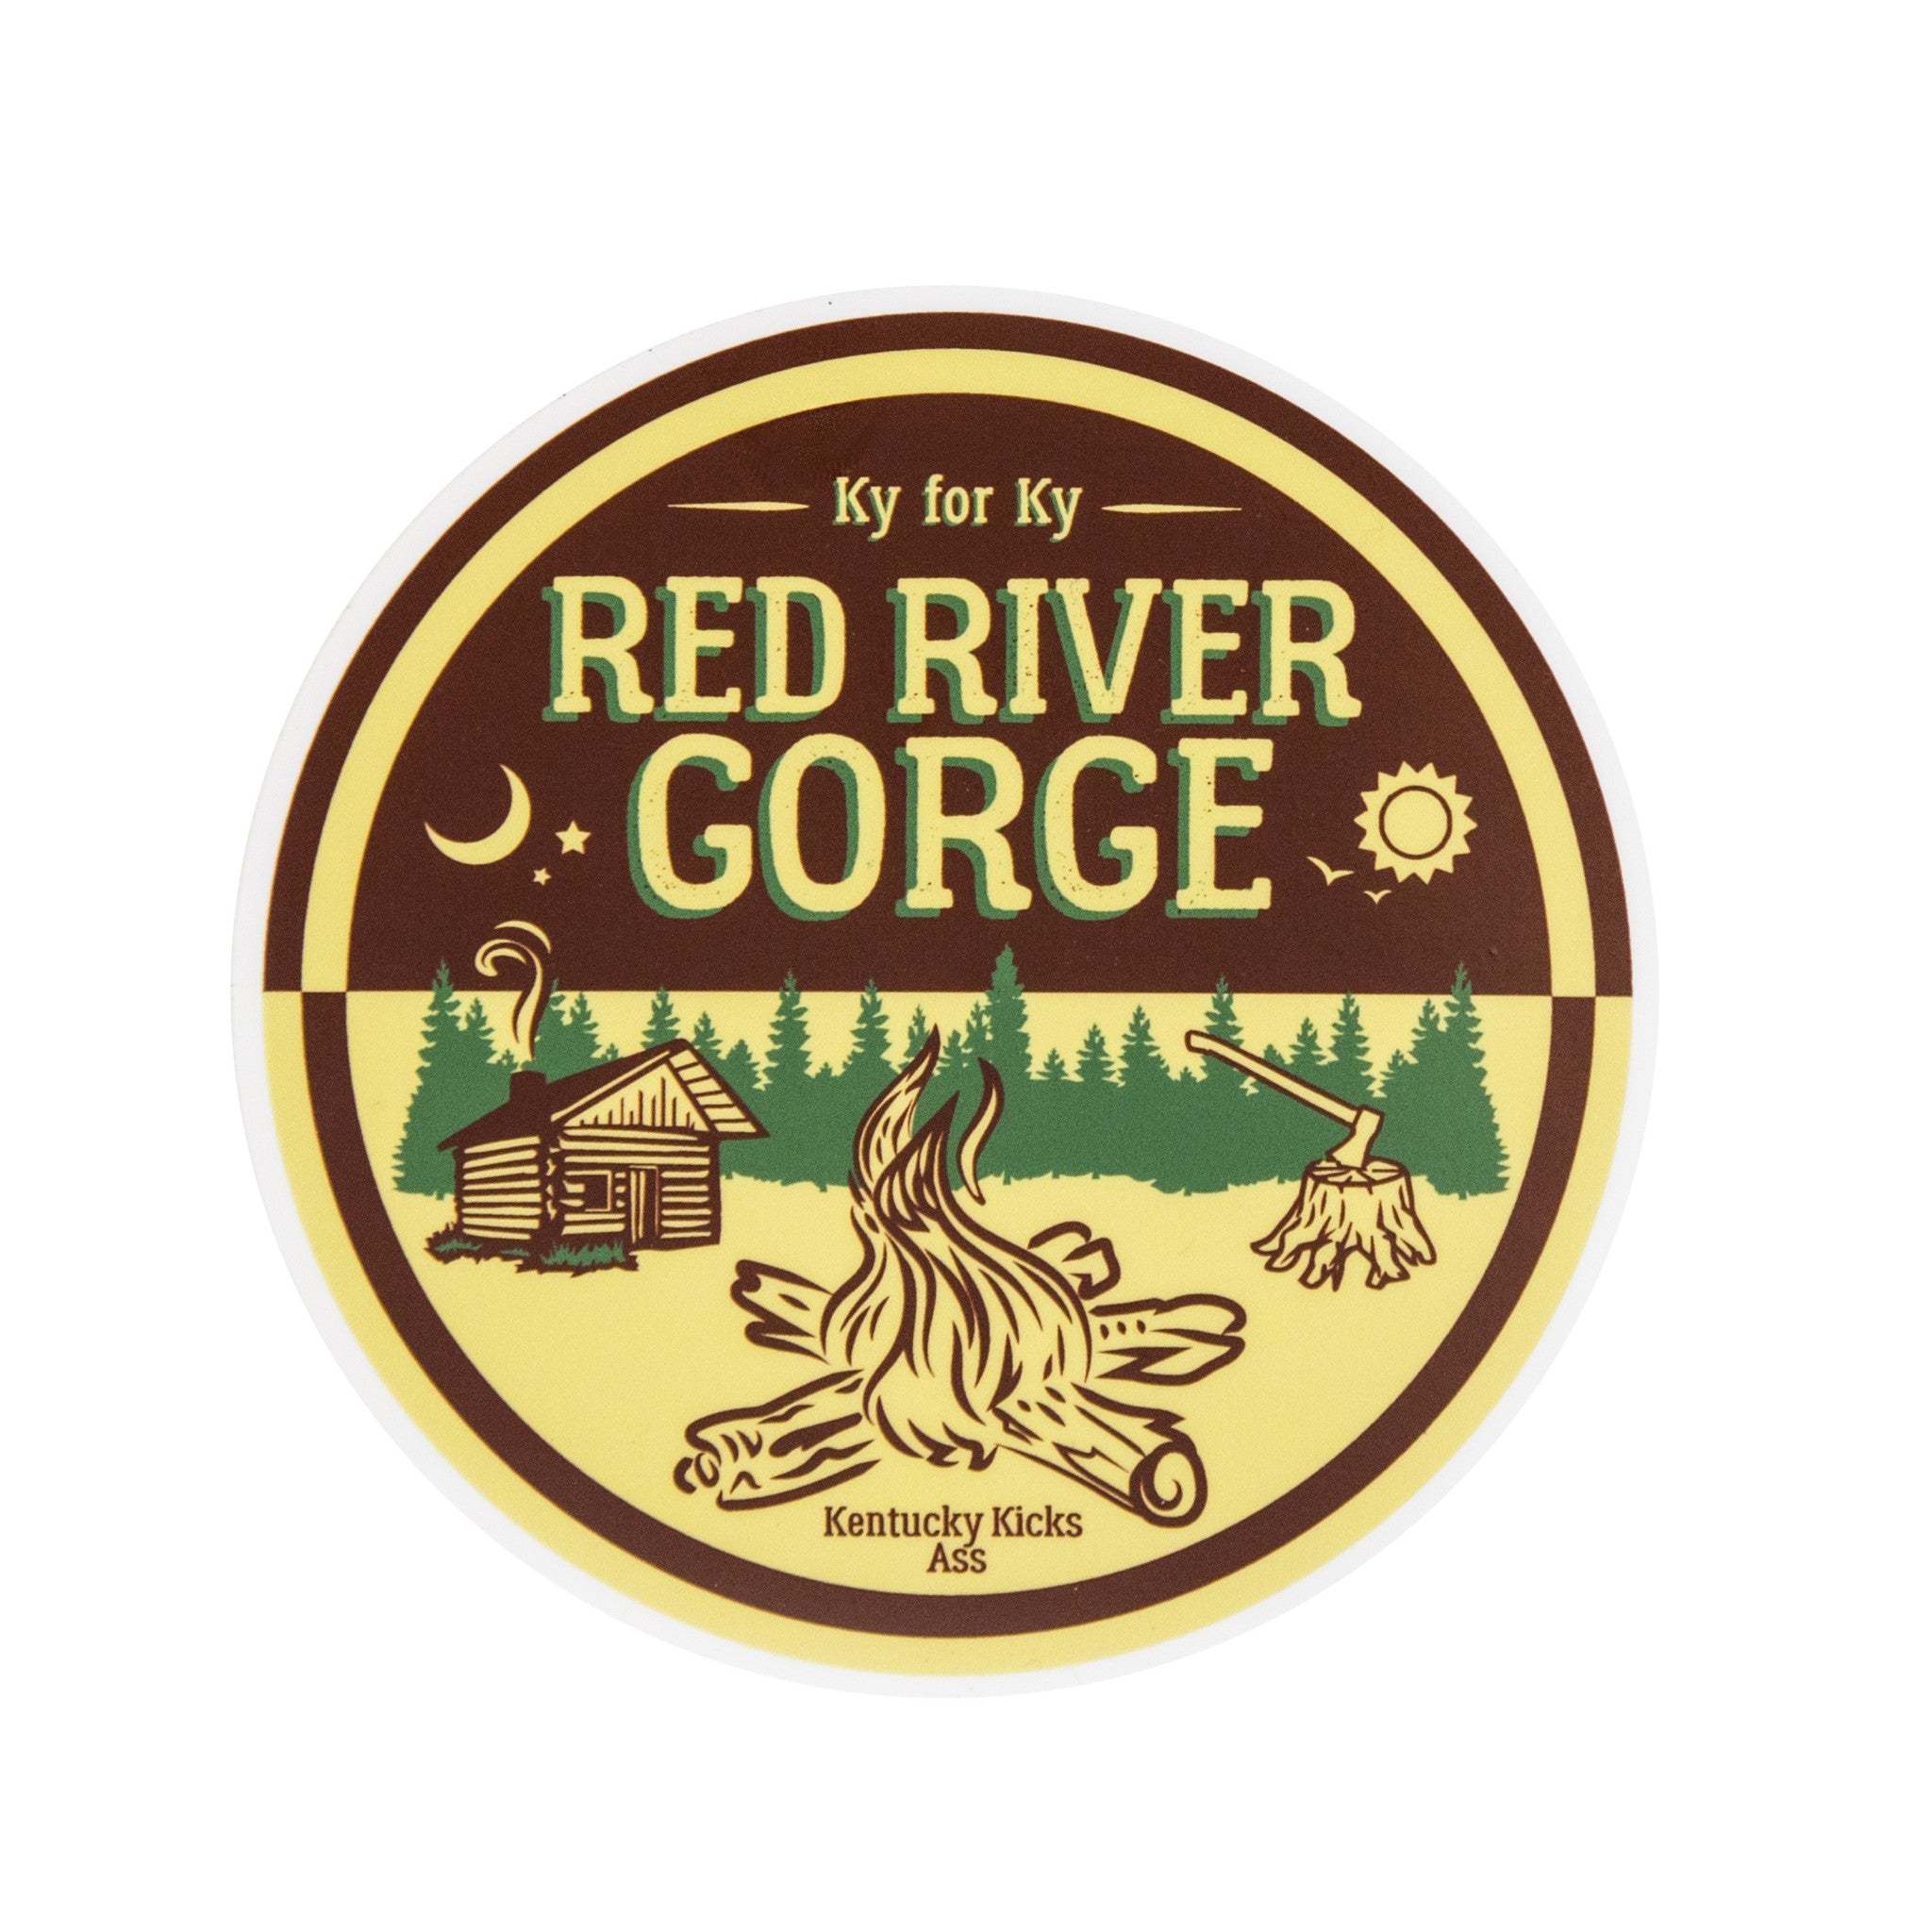 Red River Gorge Camp Sticker-Stickers-KY for KY Store